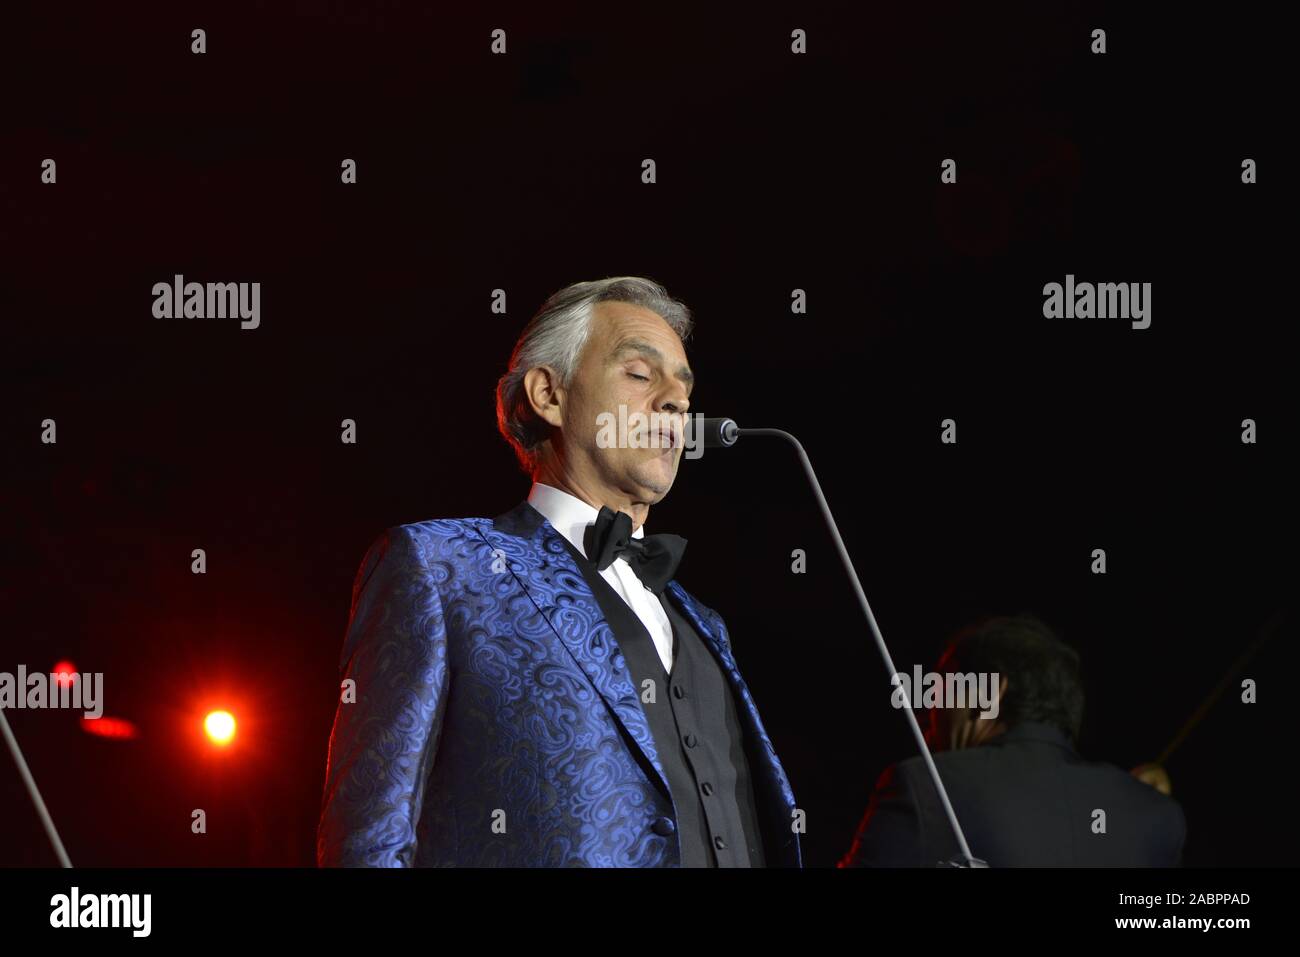 The Italian tenor and singer Andrea Bocelli at the Griminelli & Friends concert Stock Photo